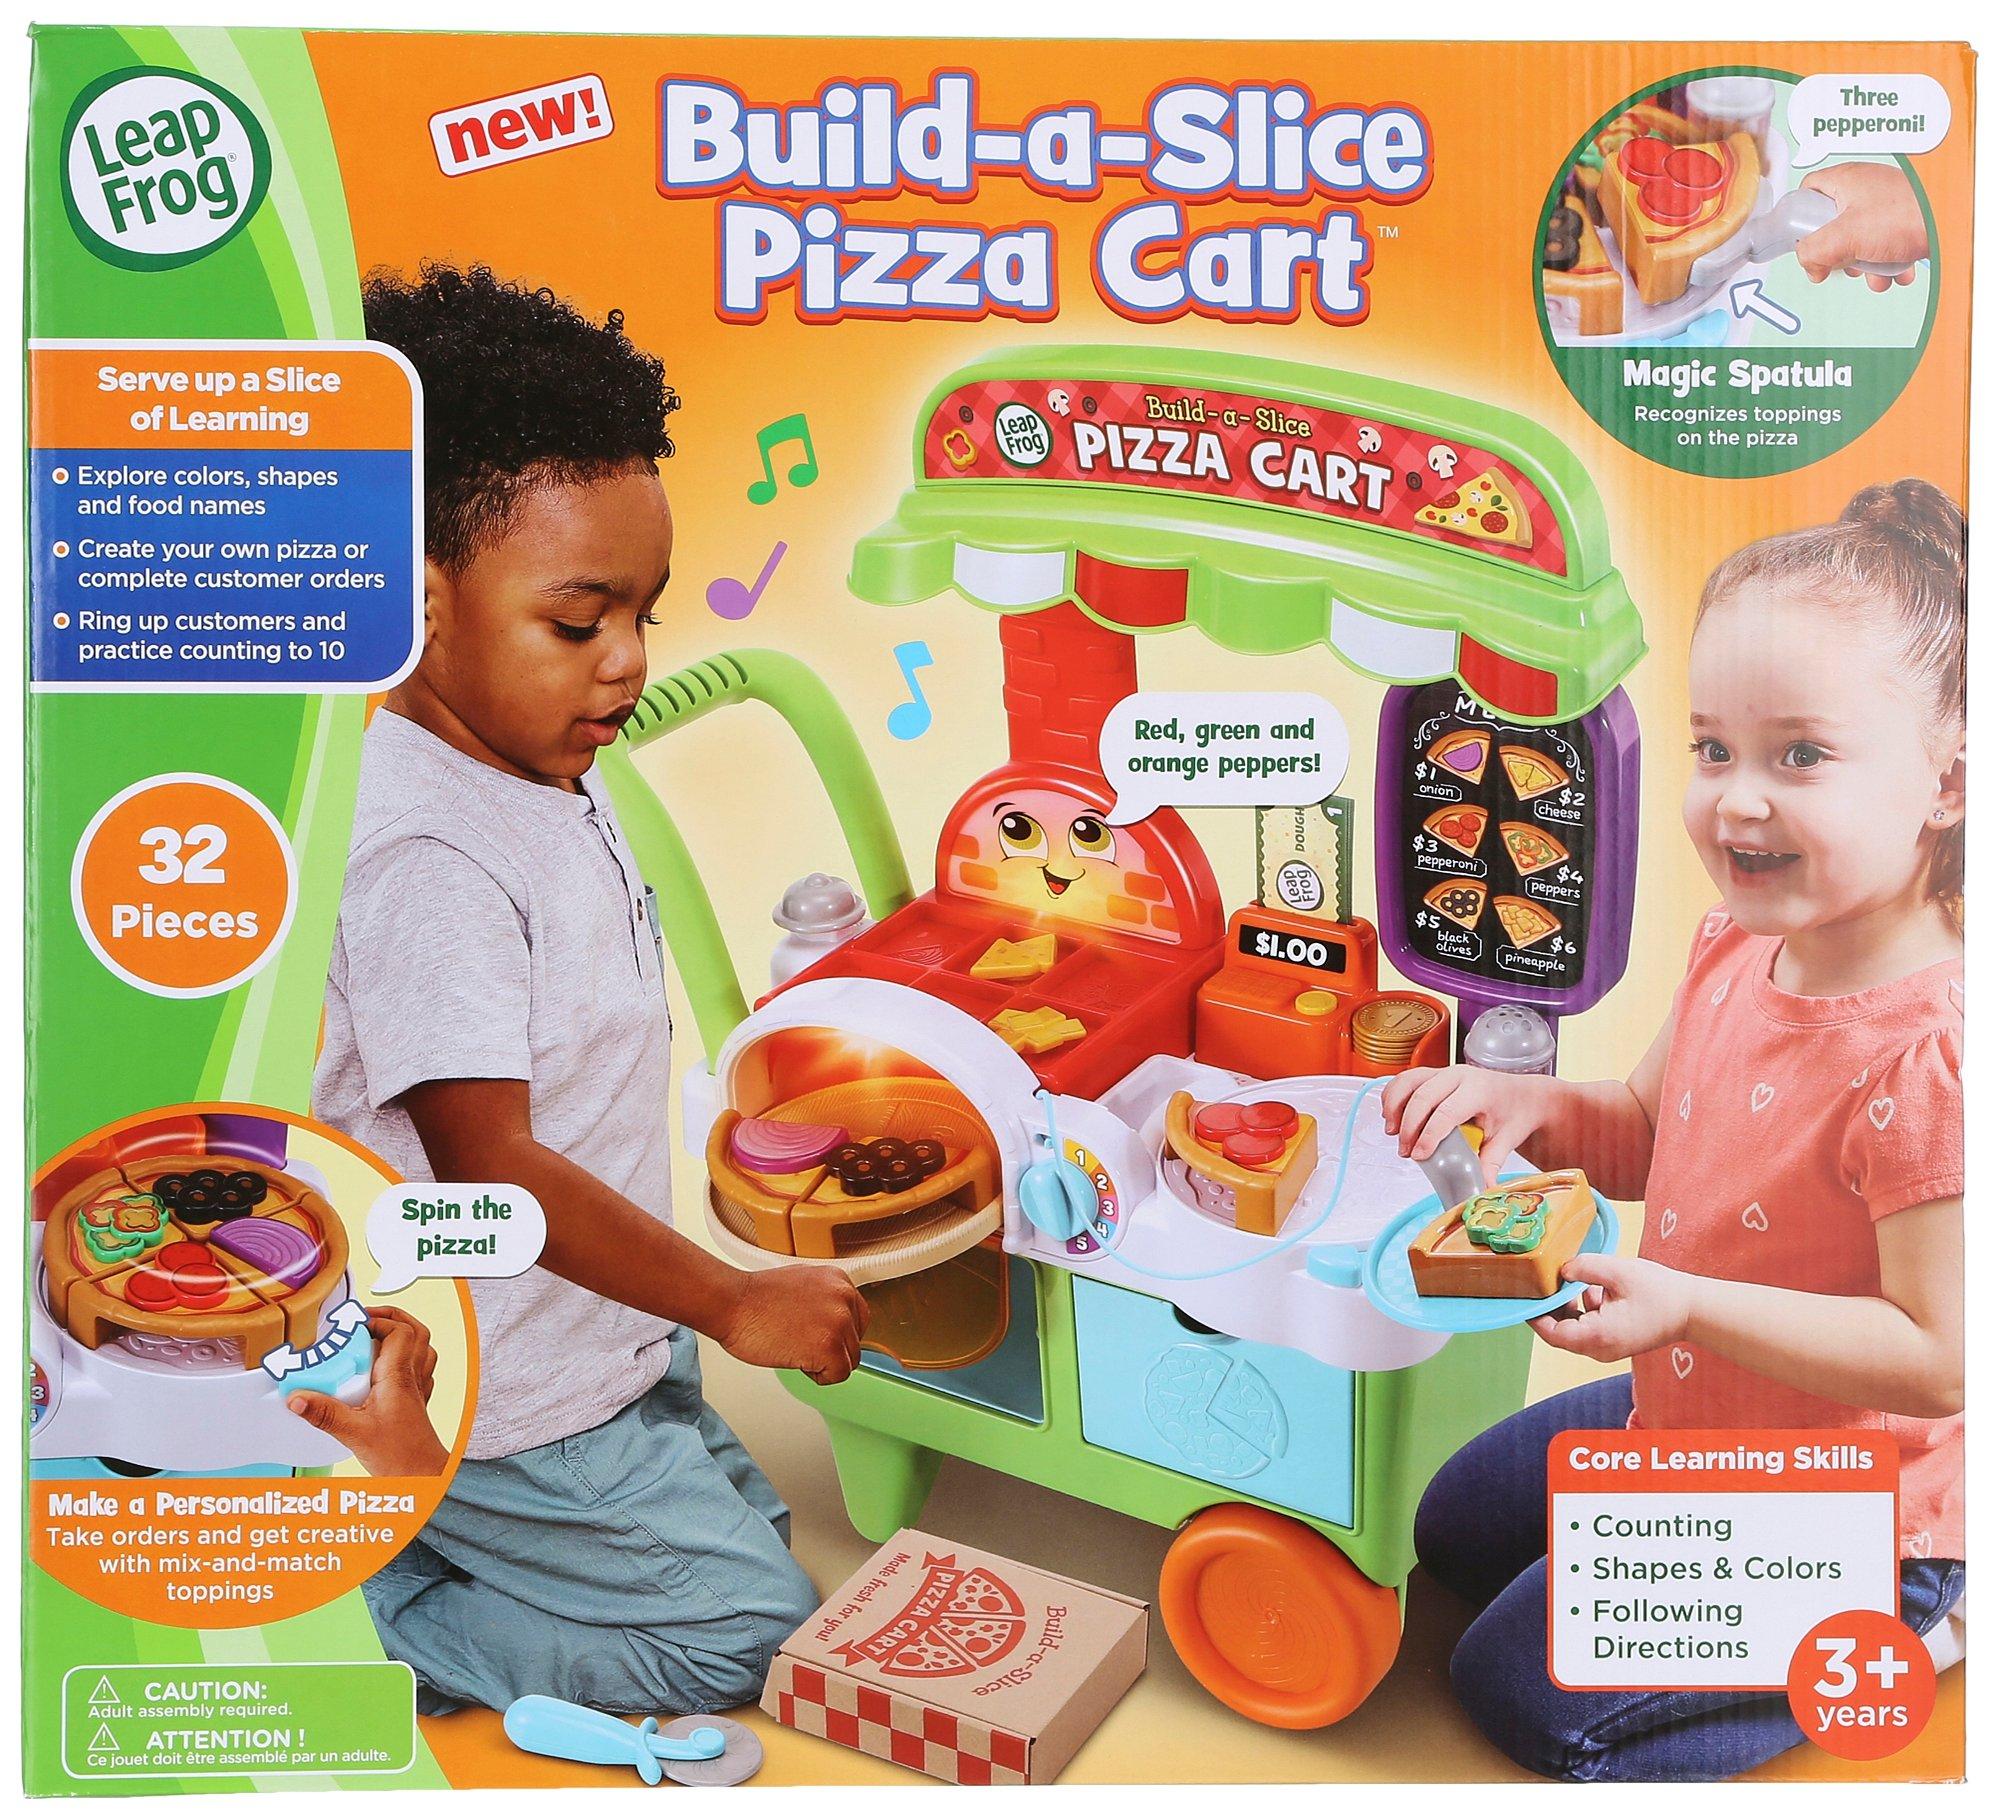 Build-a-Slice Pizza Cart Toy Playset